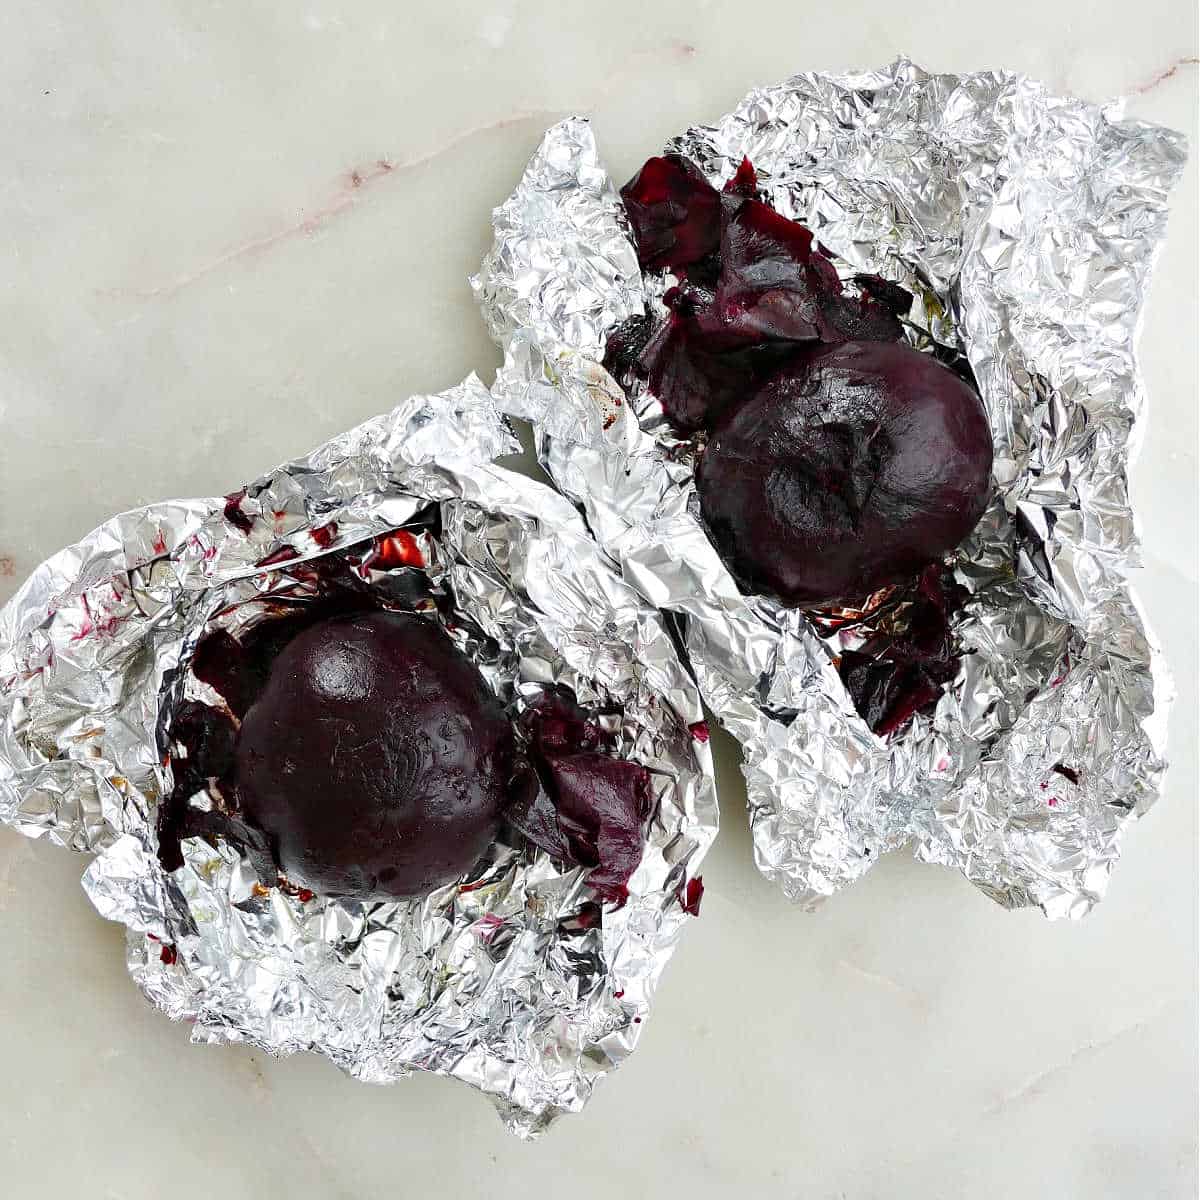 2 roasted beets with the skin removed on top of foil packets